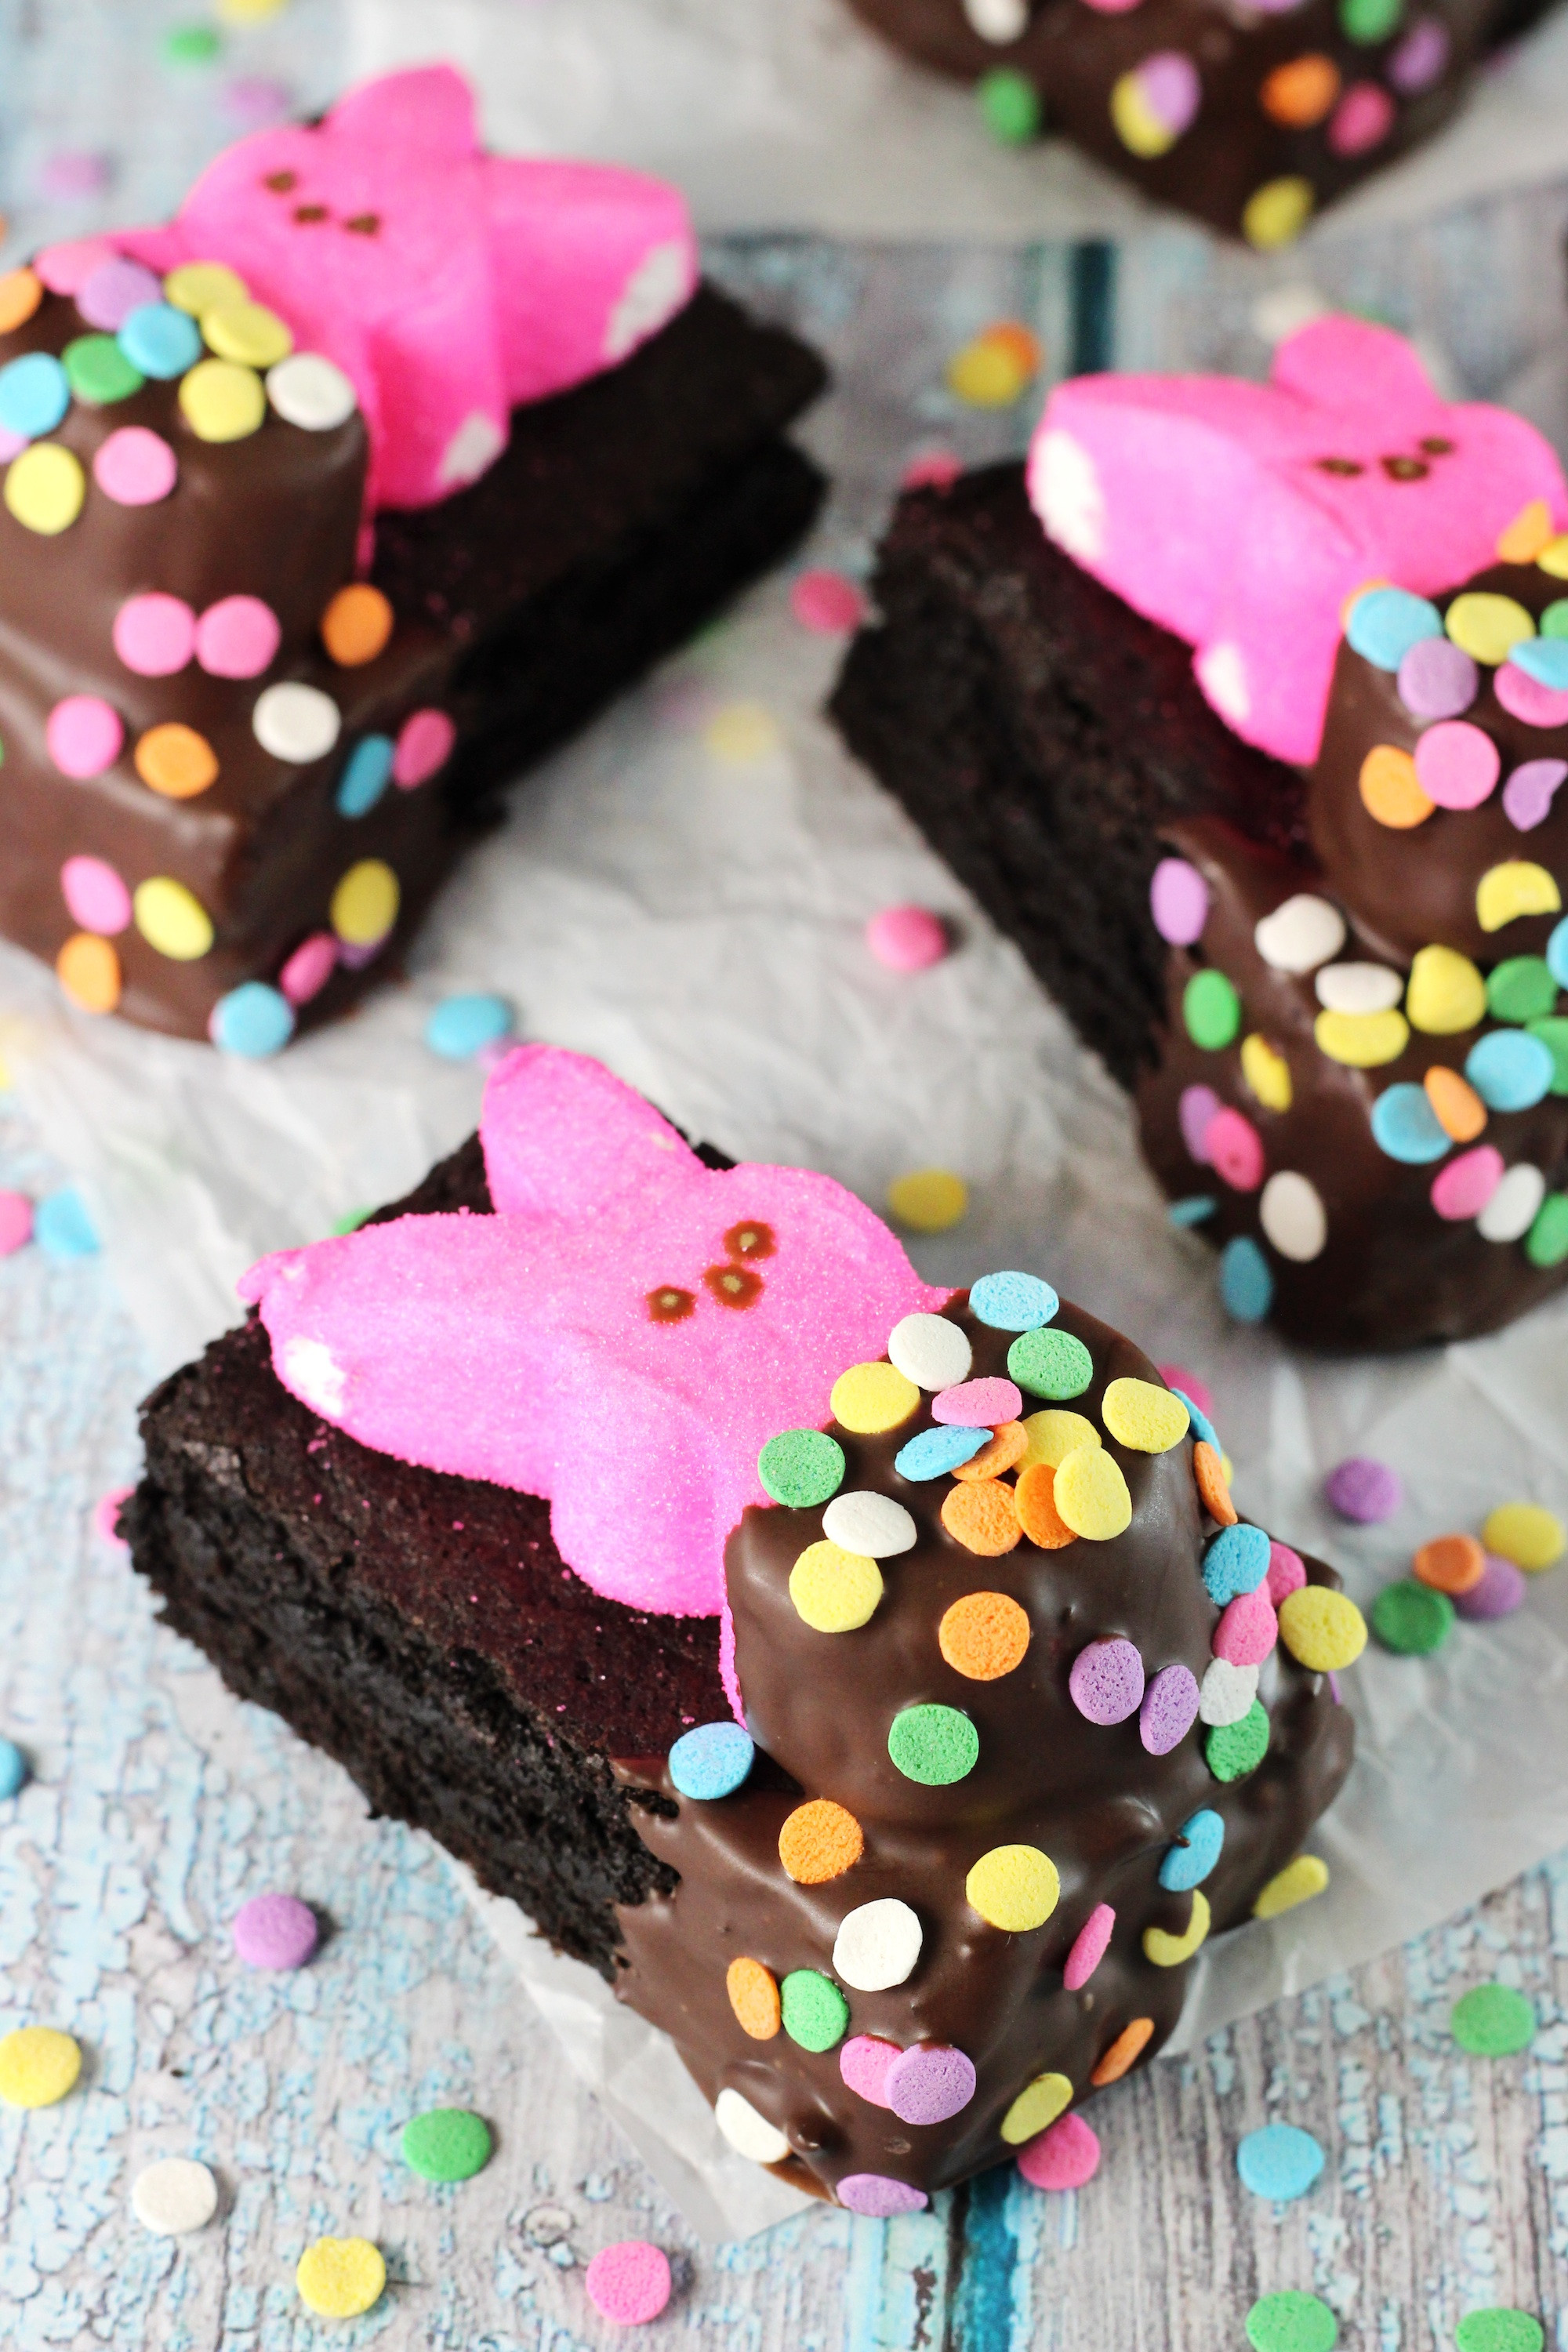 Easy Easter Dessert Recipes
 11 Easy Easter Desserts That Are Almost Too Adorable To